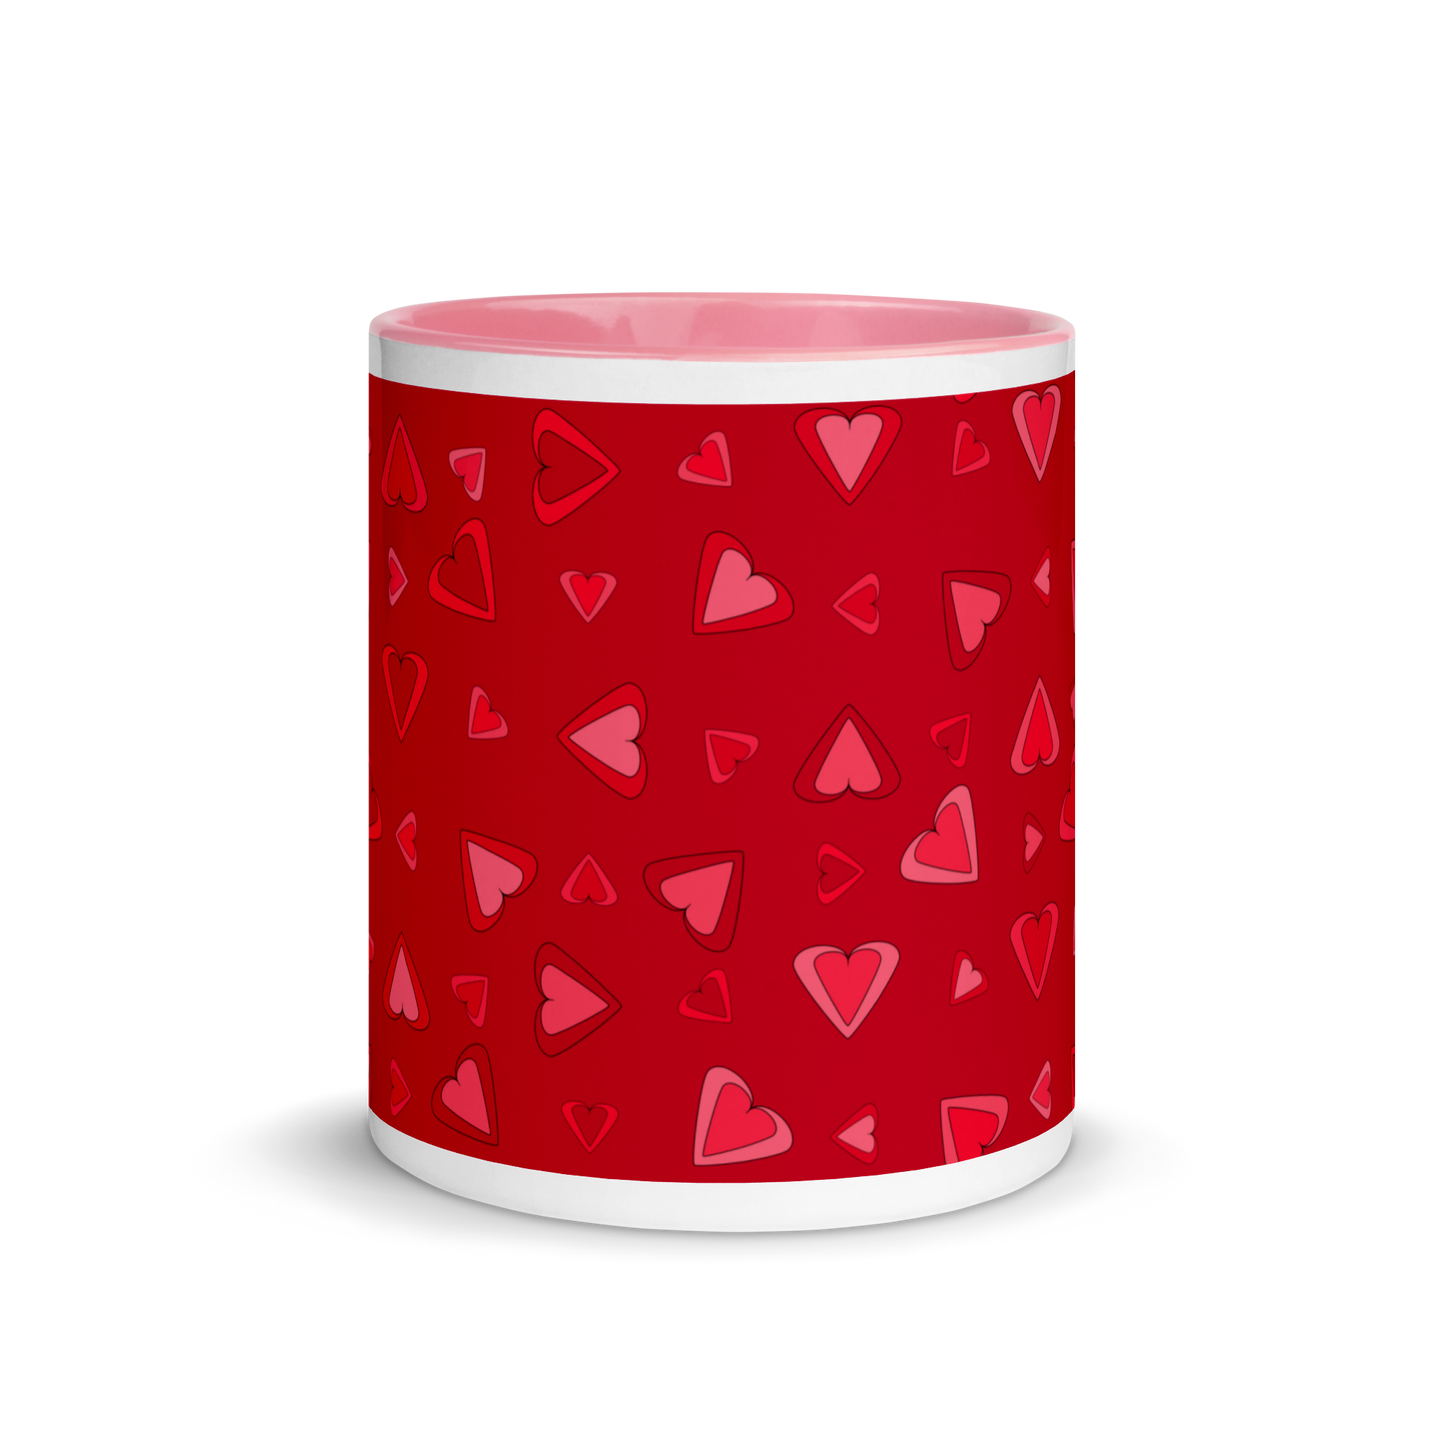 Rainbow Of Hearts | Batch 01 | Seamless Patterns | White Ceramic Mug with Color Inside - #11